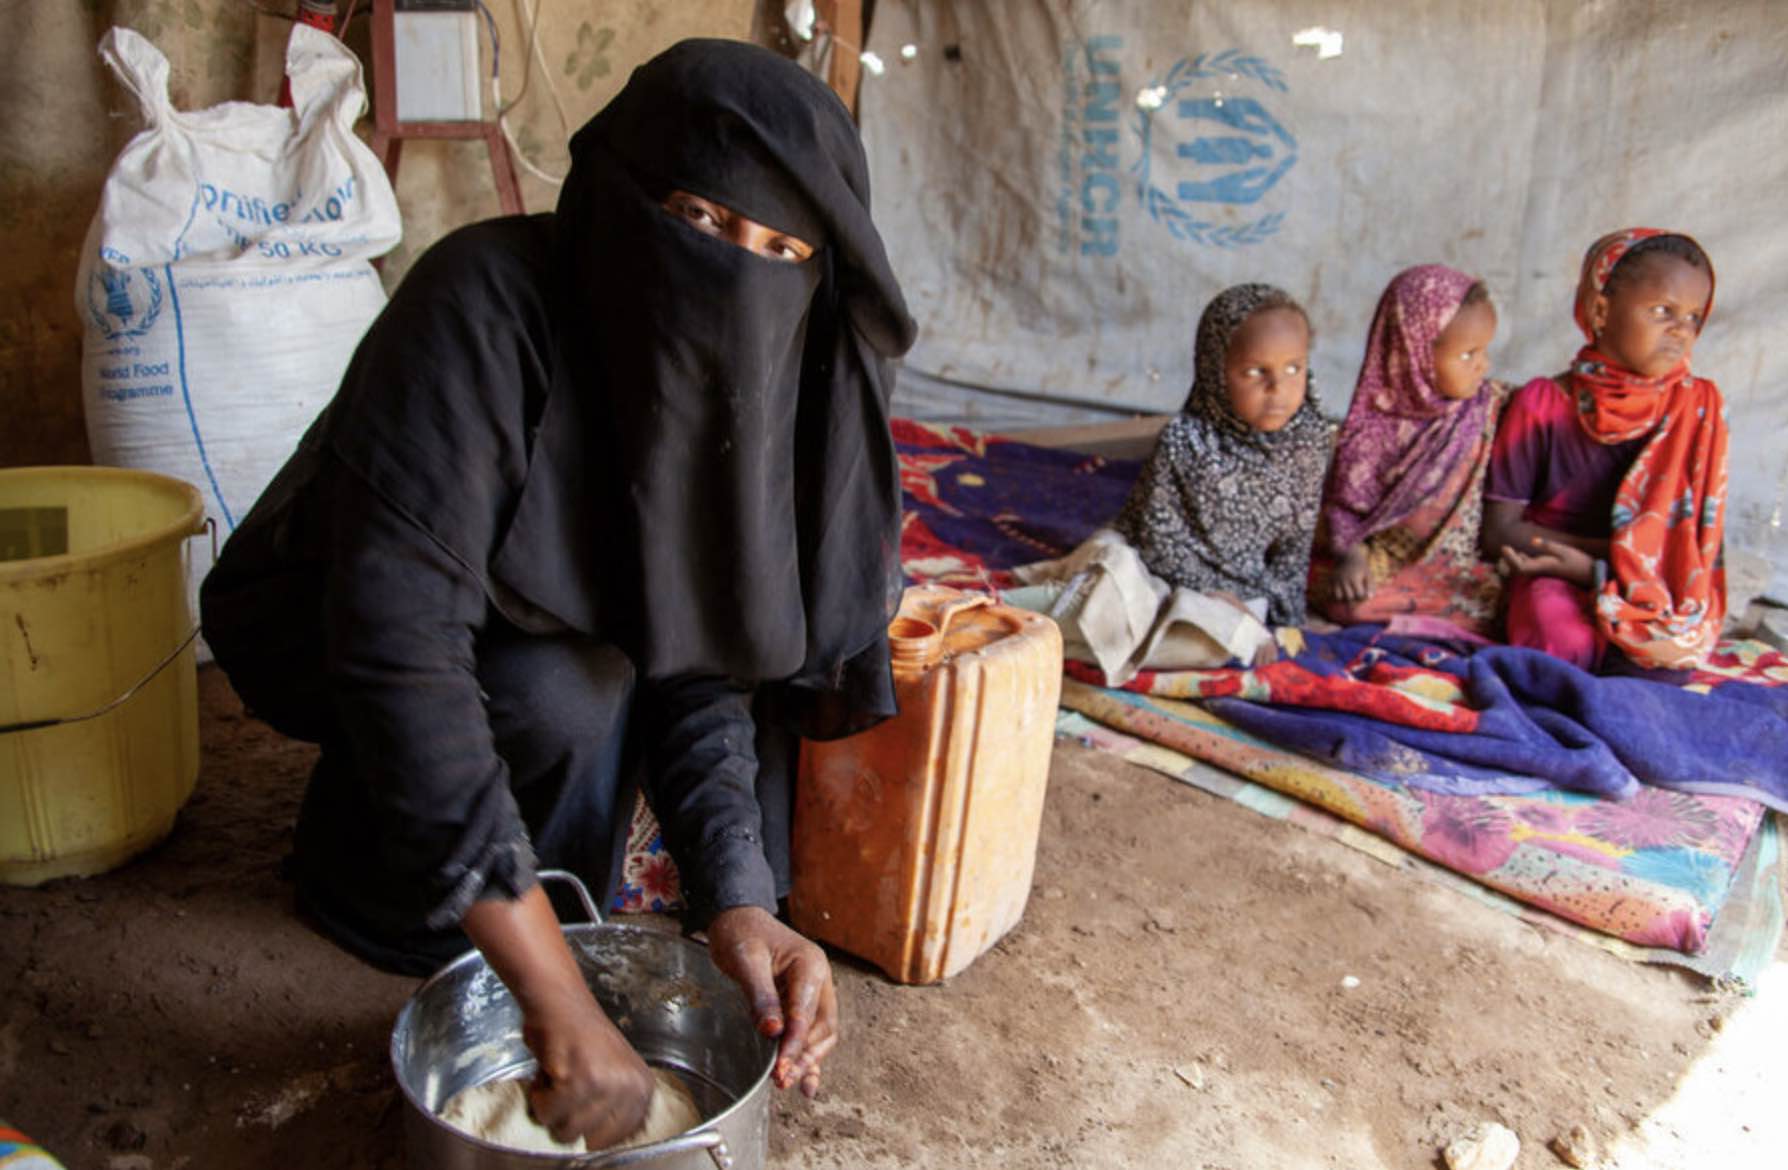 A woman prepares food for her three children in a Yemen settlement for displaced people